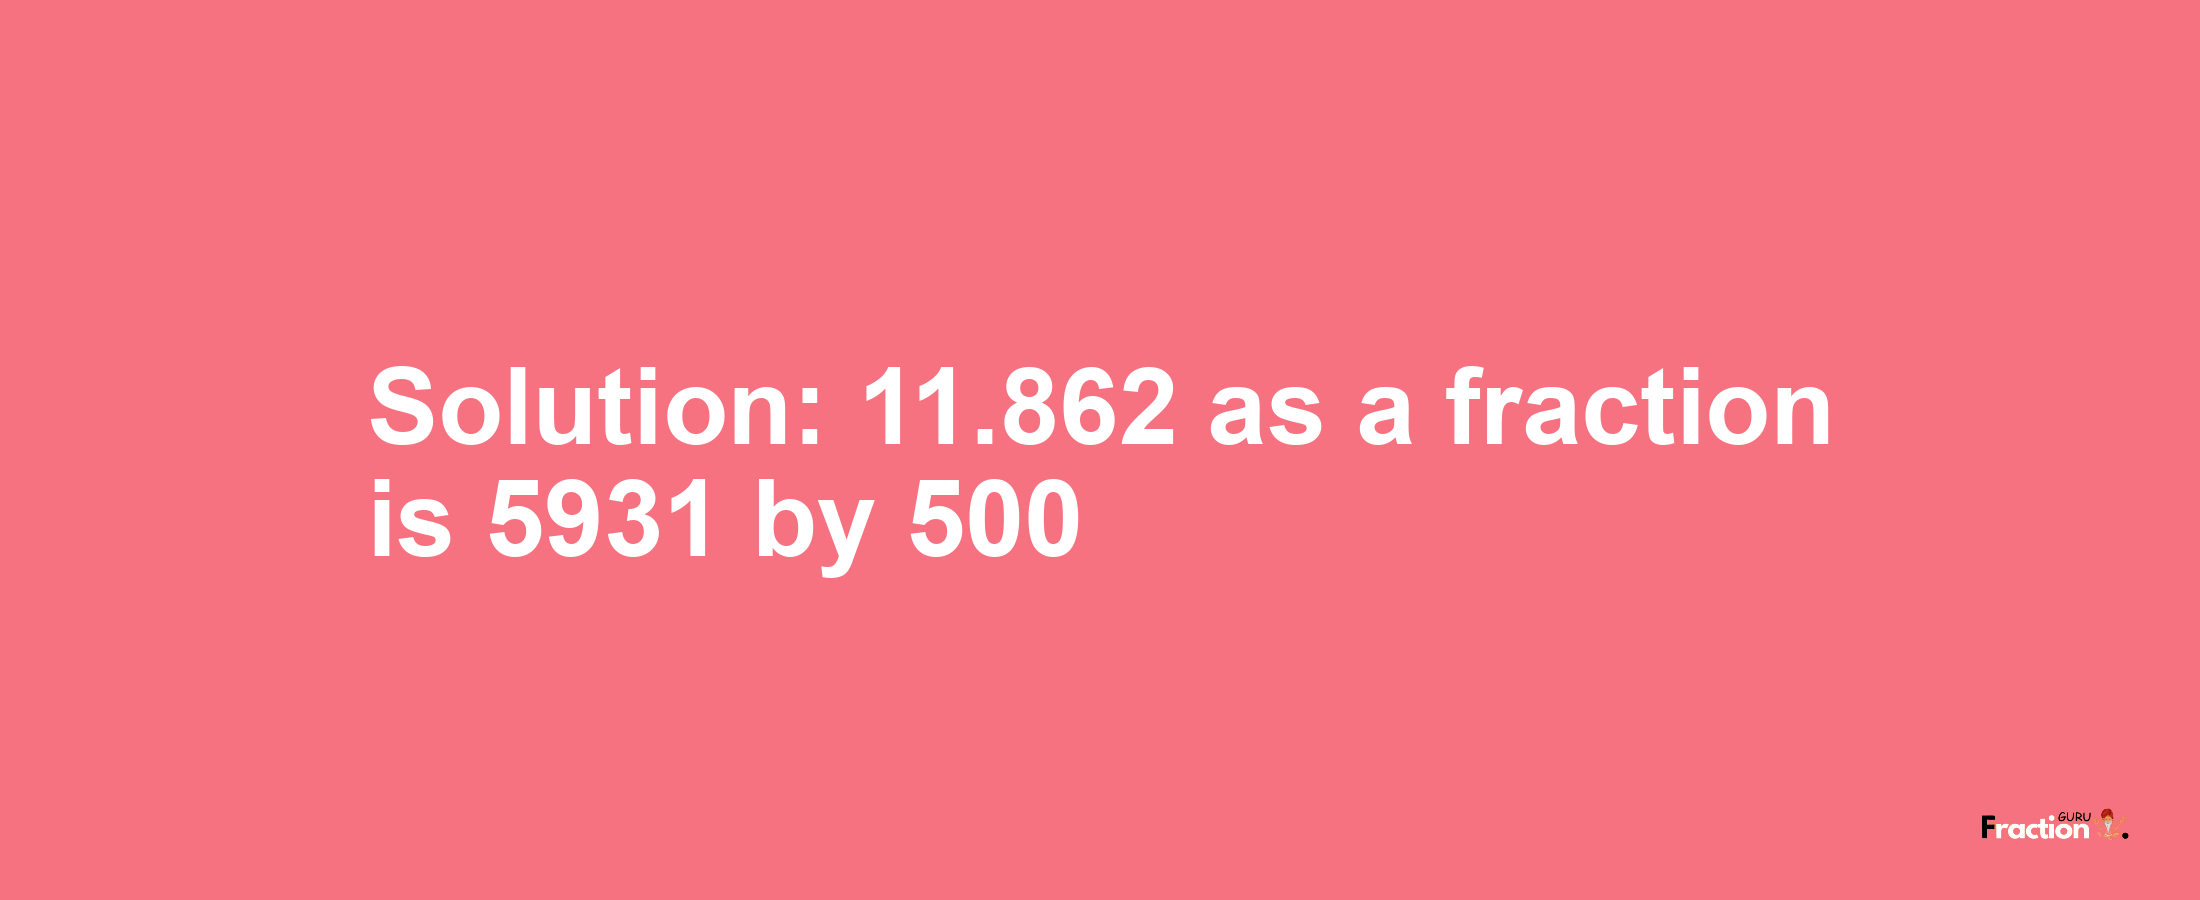 Solution:11.862 as a fraction is 5931/500